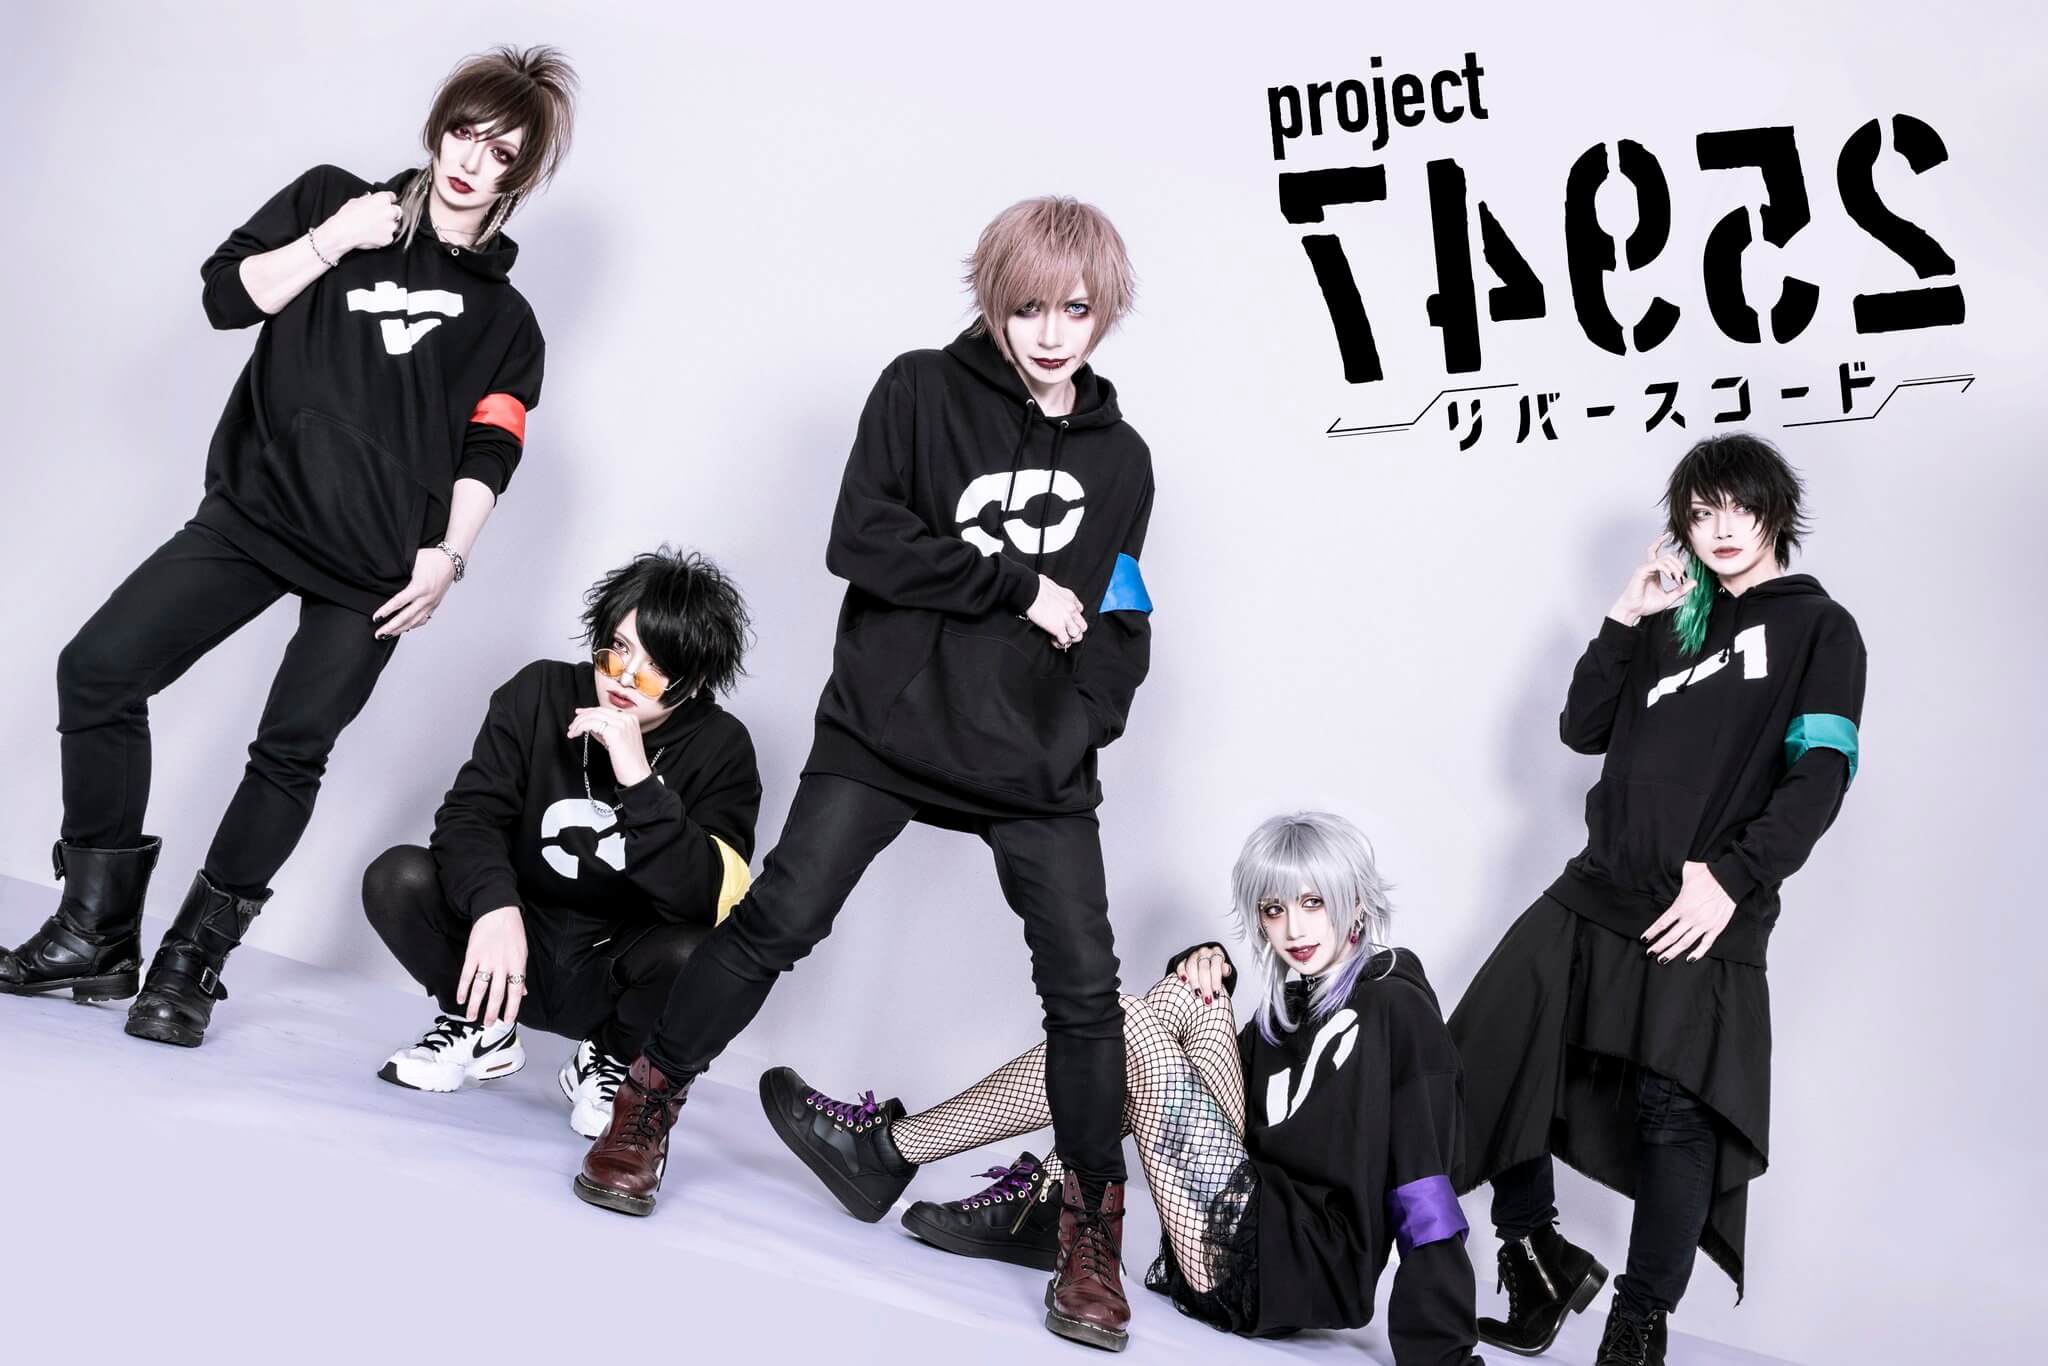 Session band [R:codE] is now project band "project 74952-REVERSE CODE-"